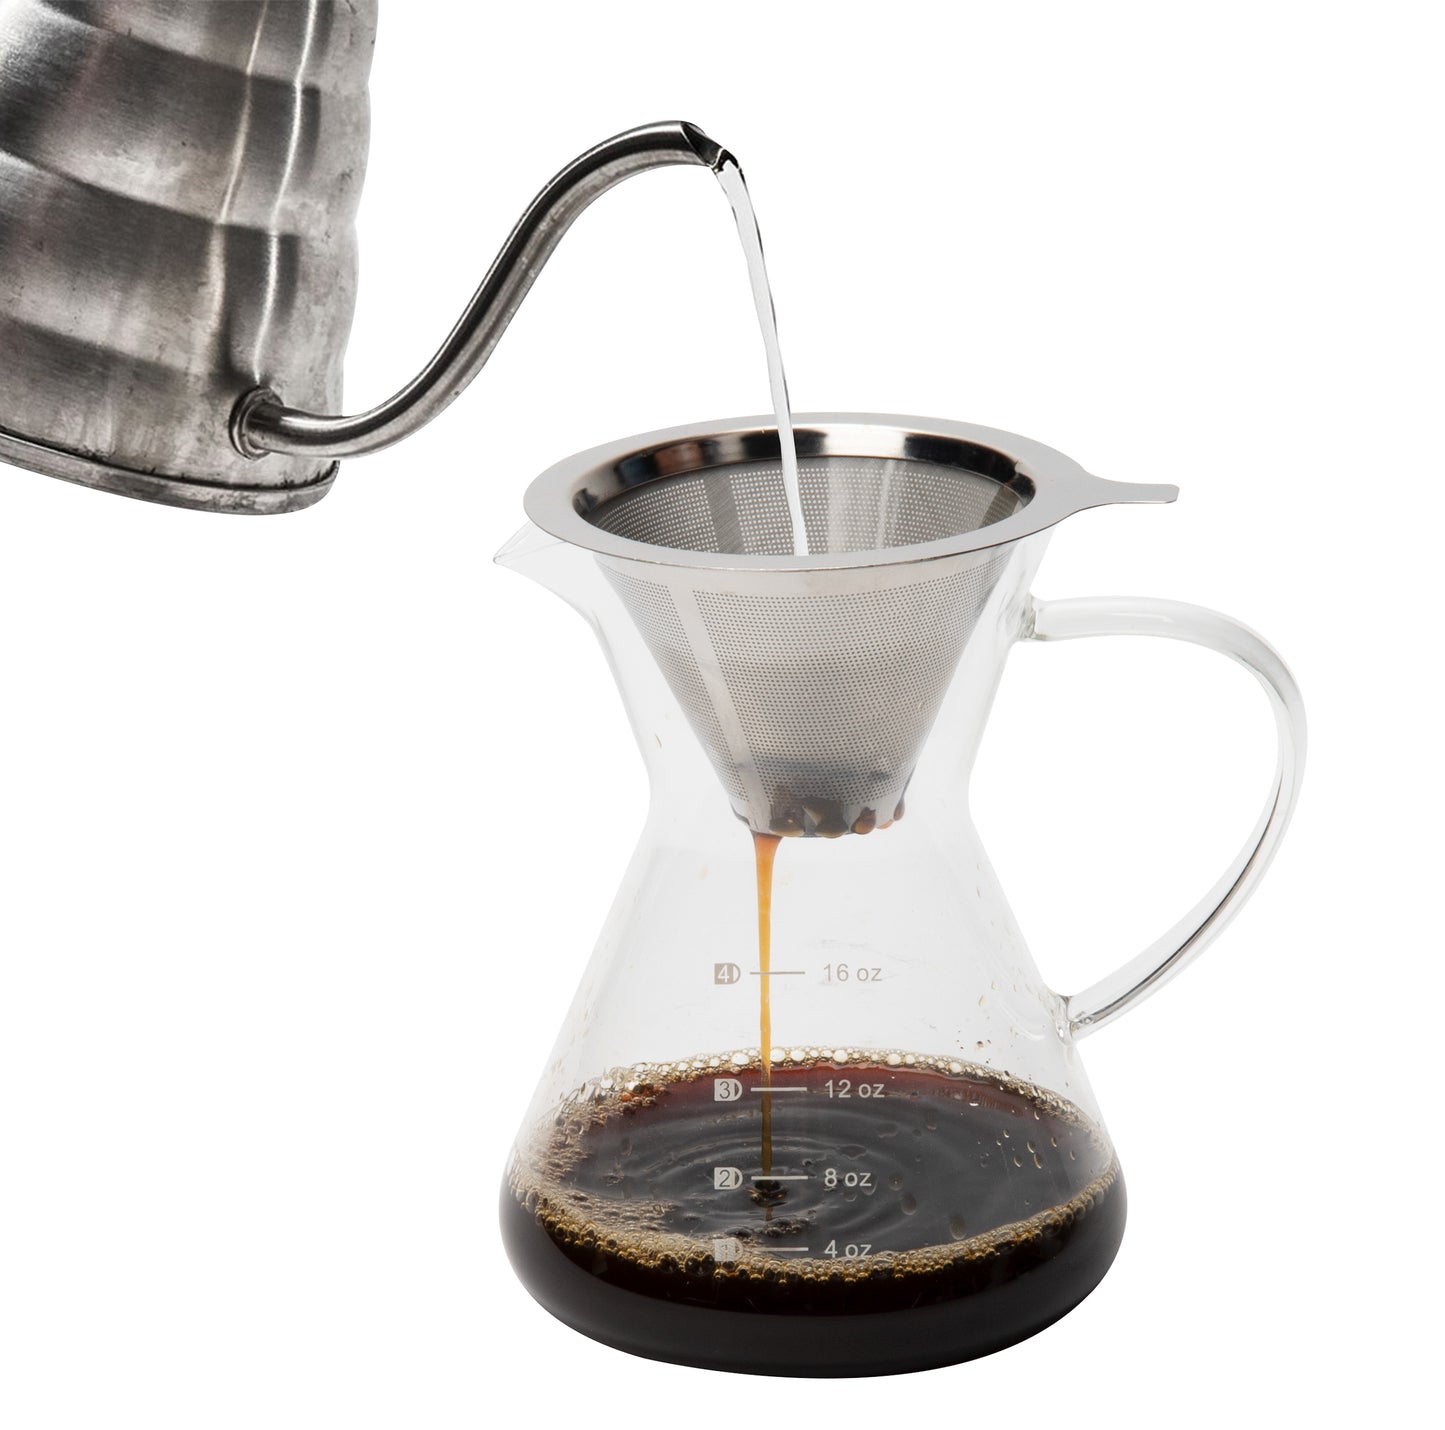 Reusable Pour Over Coffee Filter for Chemex and Hario V60 (Black